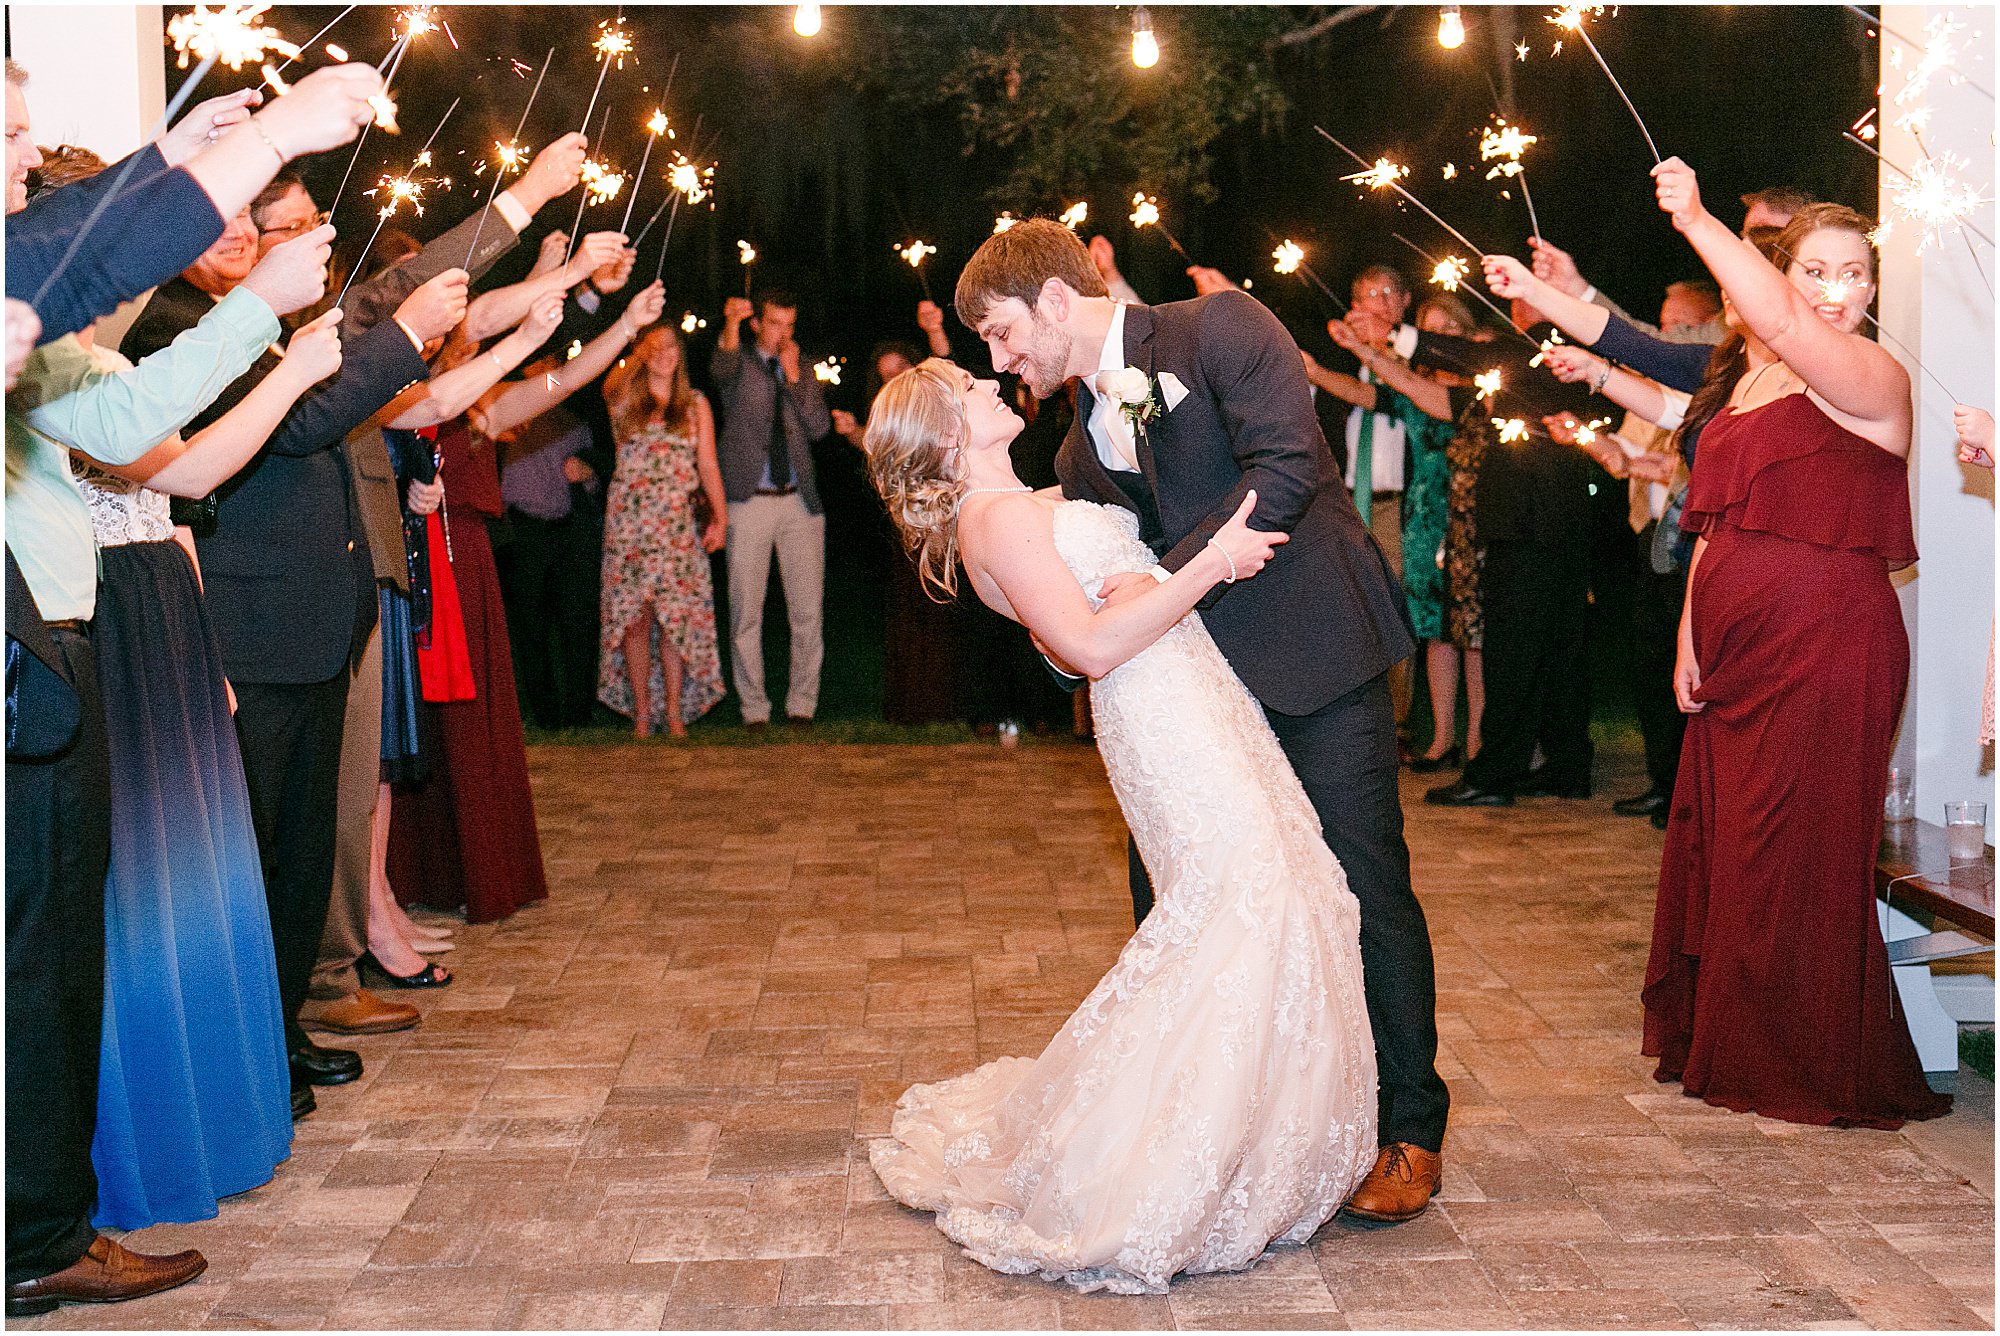 Groom dips the bride as guests wave sparklers as they leave wedding. 